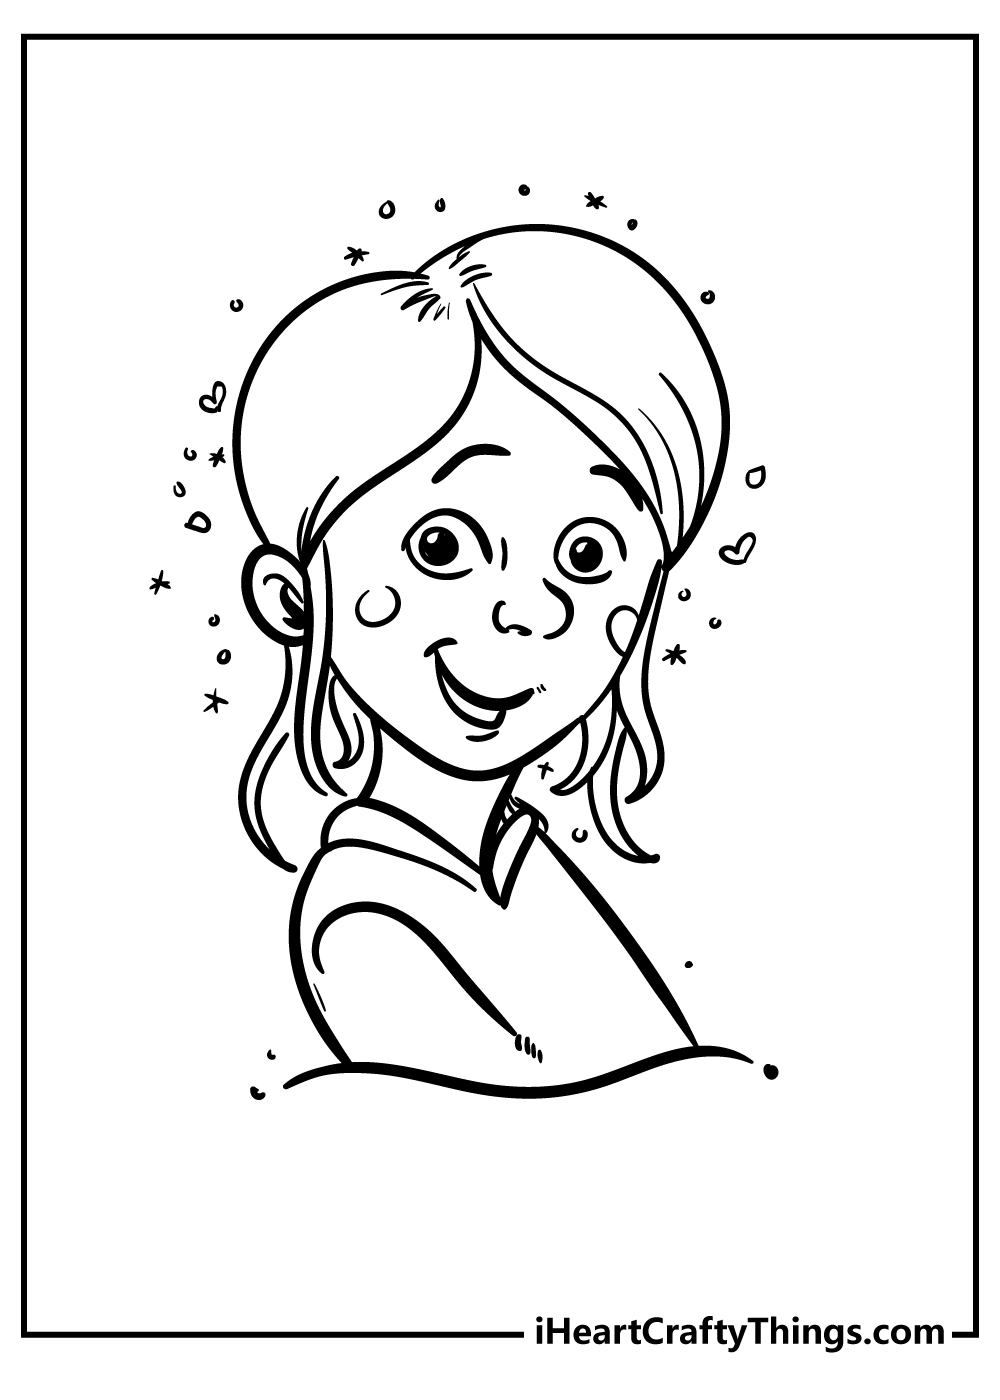 Happy Coloring Pages free pdf download